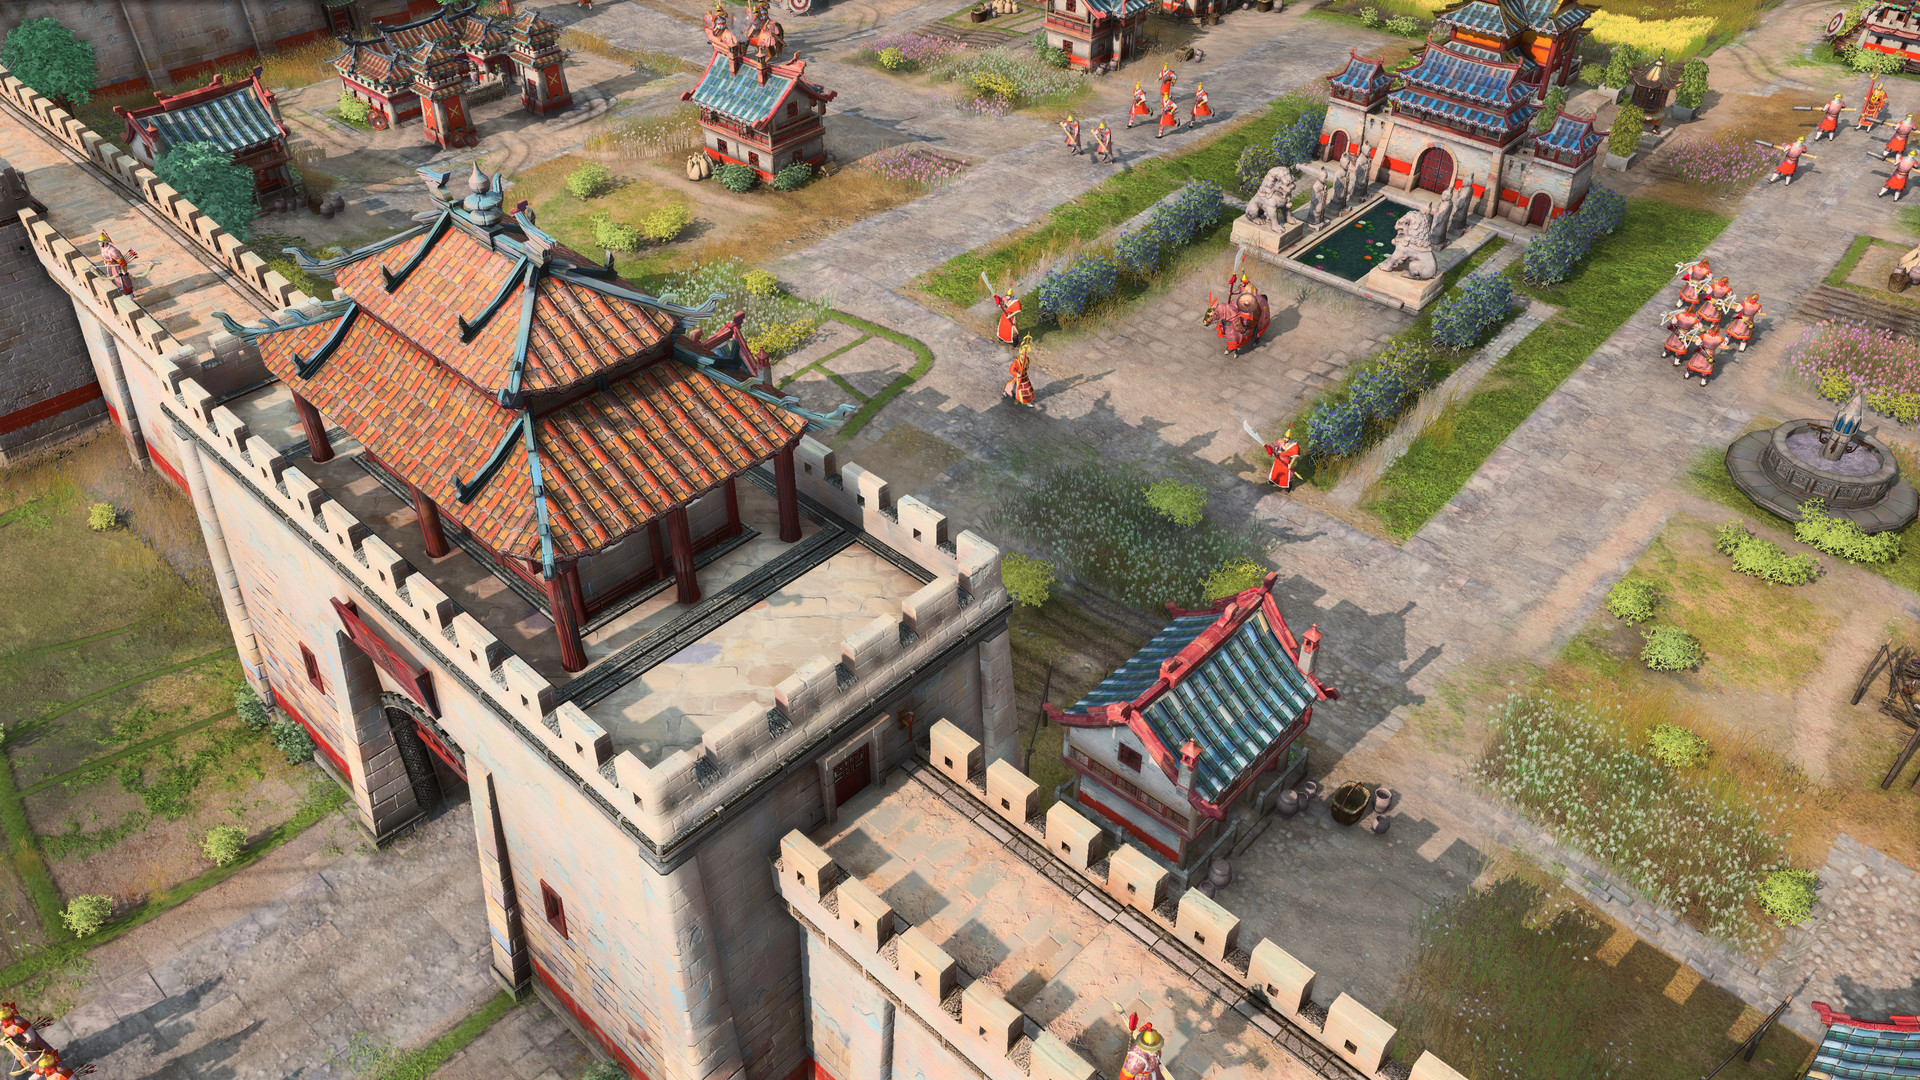 Age Of Empires 4 To Launch On Pc In Q3 21 New Screenshots Trailers And First Gameplay Video